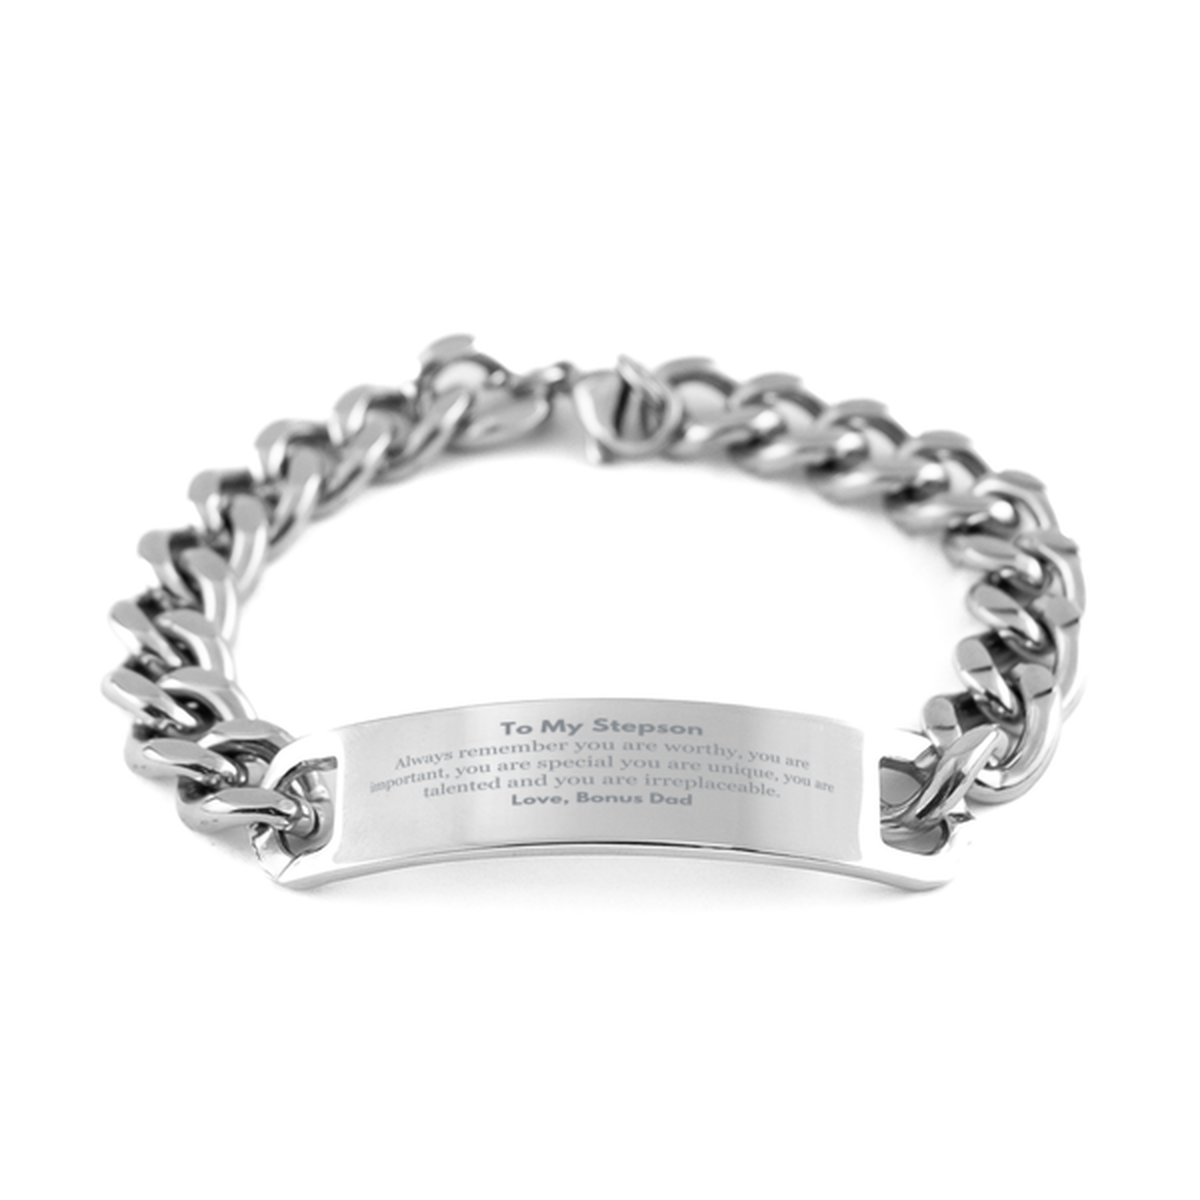 Stepson Birthday Gifts from Bonus Dad, Inspirational Cuban Chain Stainless Steel Bracelet for Stepson Christmas Graduation Gifts for Stepson Always remember you are worthy, you are important. Love, Bonus Dad